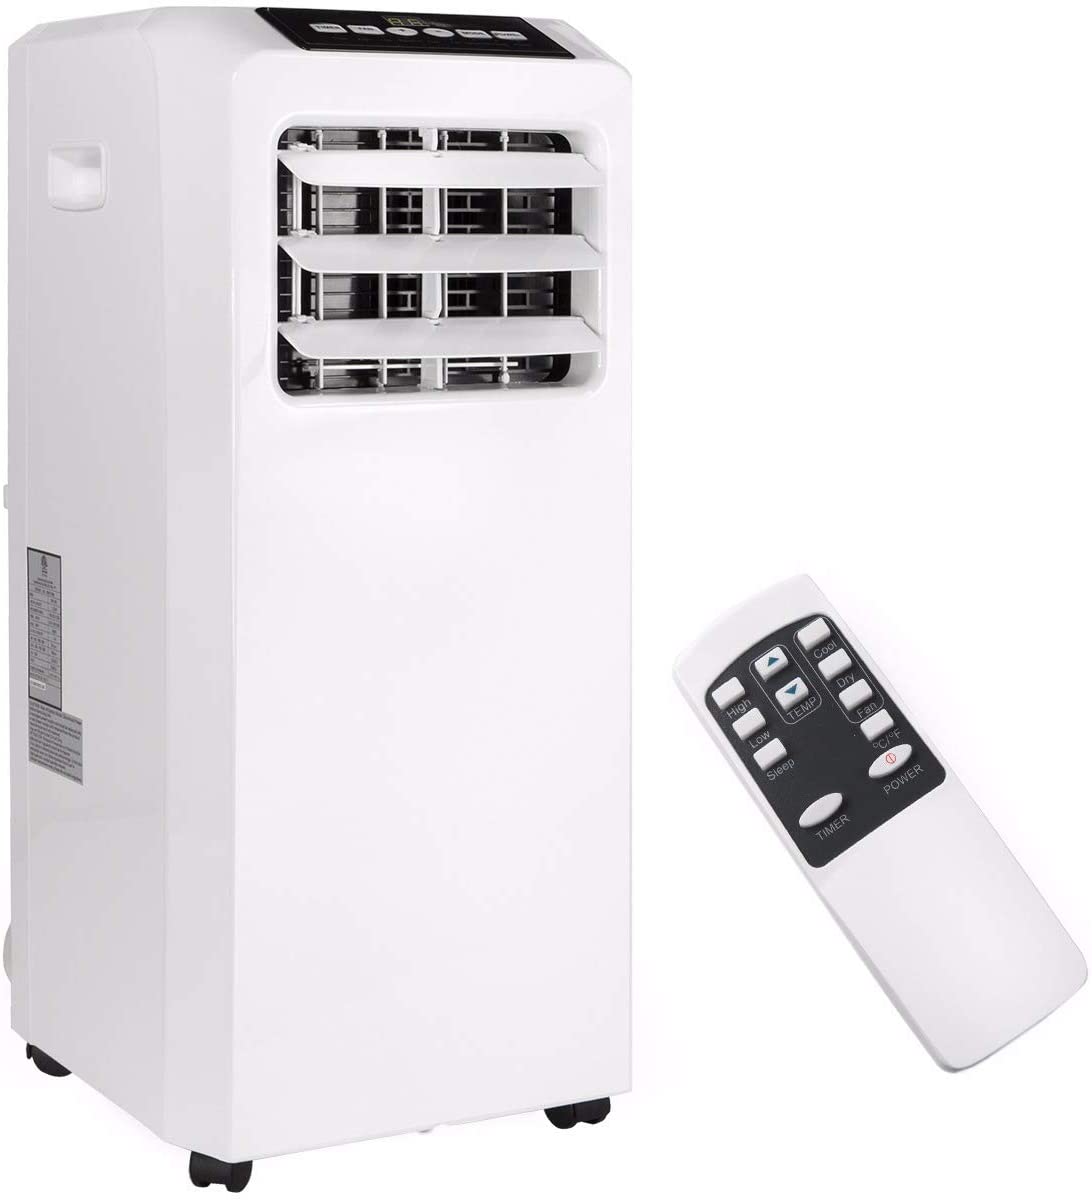 Picture of Portable Ac52 8000 BTU Ac Air Conditioner Dehumidifier Fan Unit with Remote, White